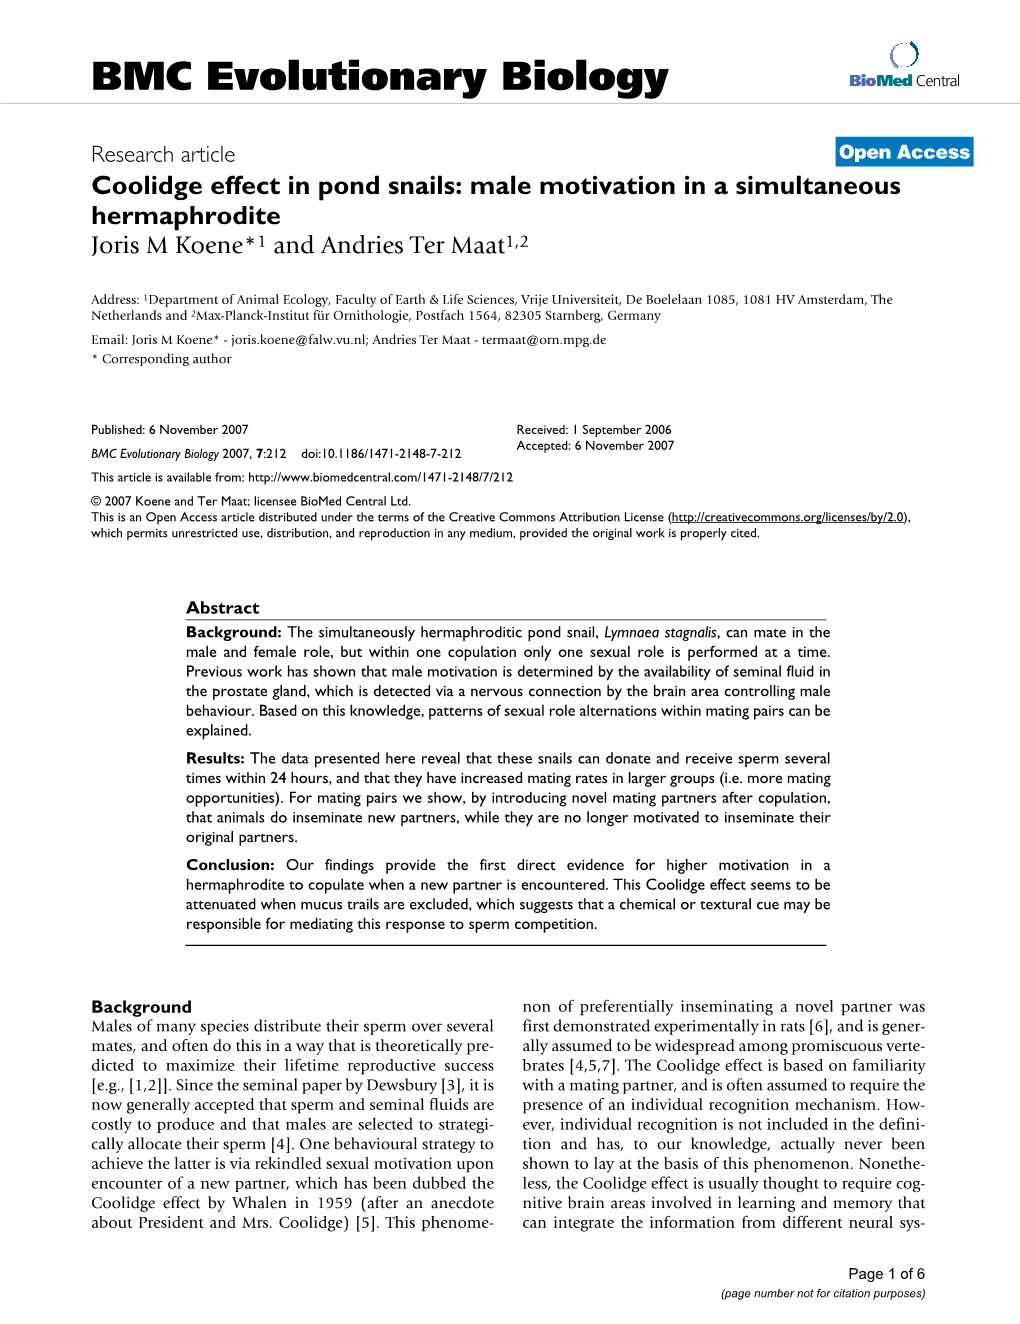 Coolidge Effect in Pond Snails: Male Motivation in a Simultaneous Hermaphrodite Jorismkoene*1 and Andries Ter Maat1,2